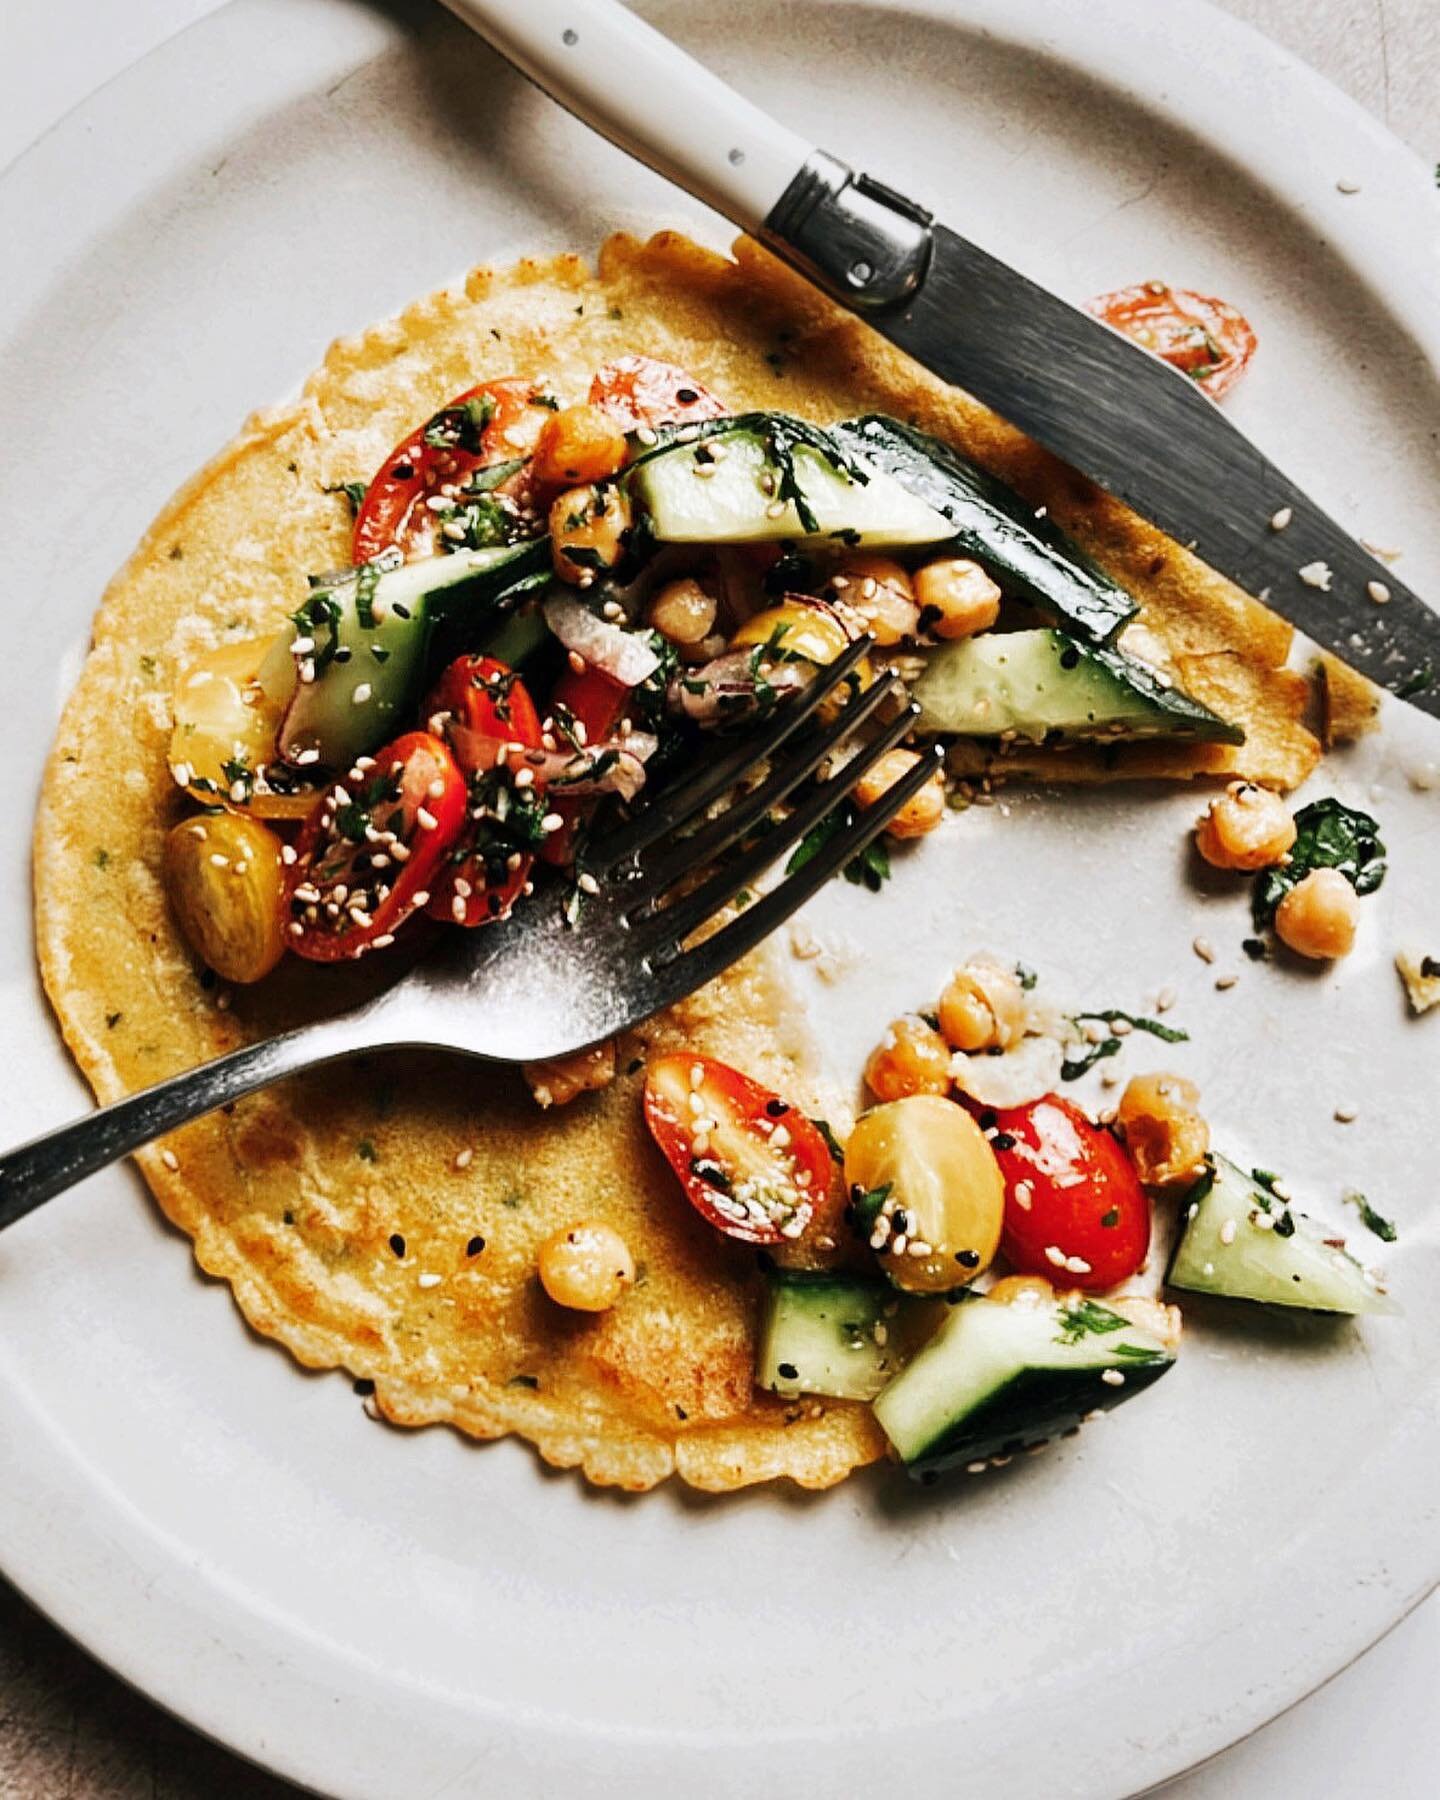 It&rsquo;s been a bit since I made the chickpea crepes from my cookbook, and forgot how easily 3 ingredients transform into a perfect, tasty, crispy vehicle for things like a simple salad, some smashed avocado, or even fancier toppings like maybe som